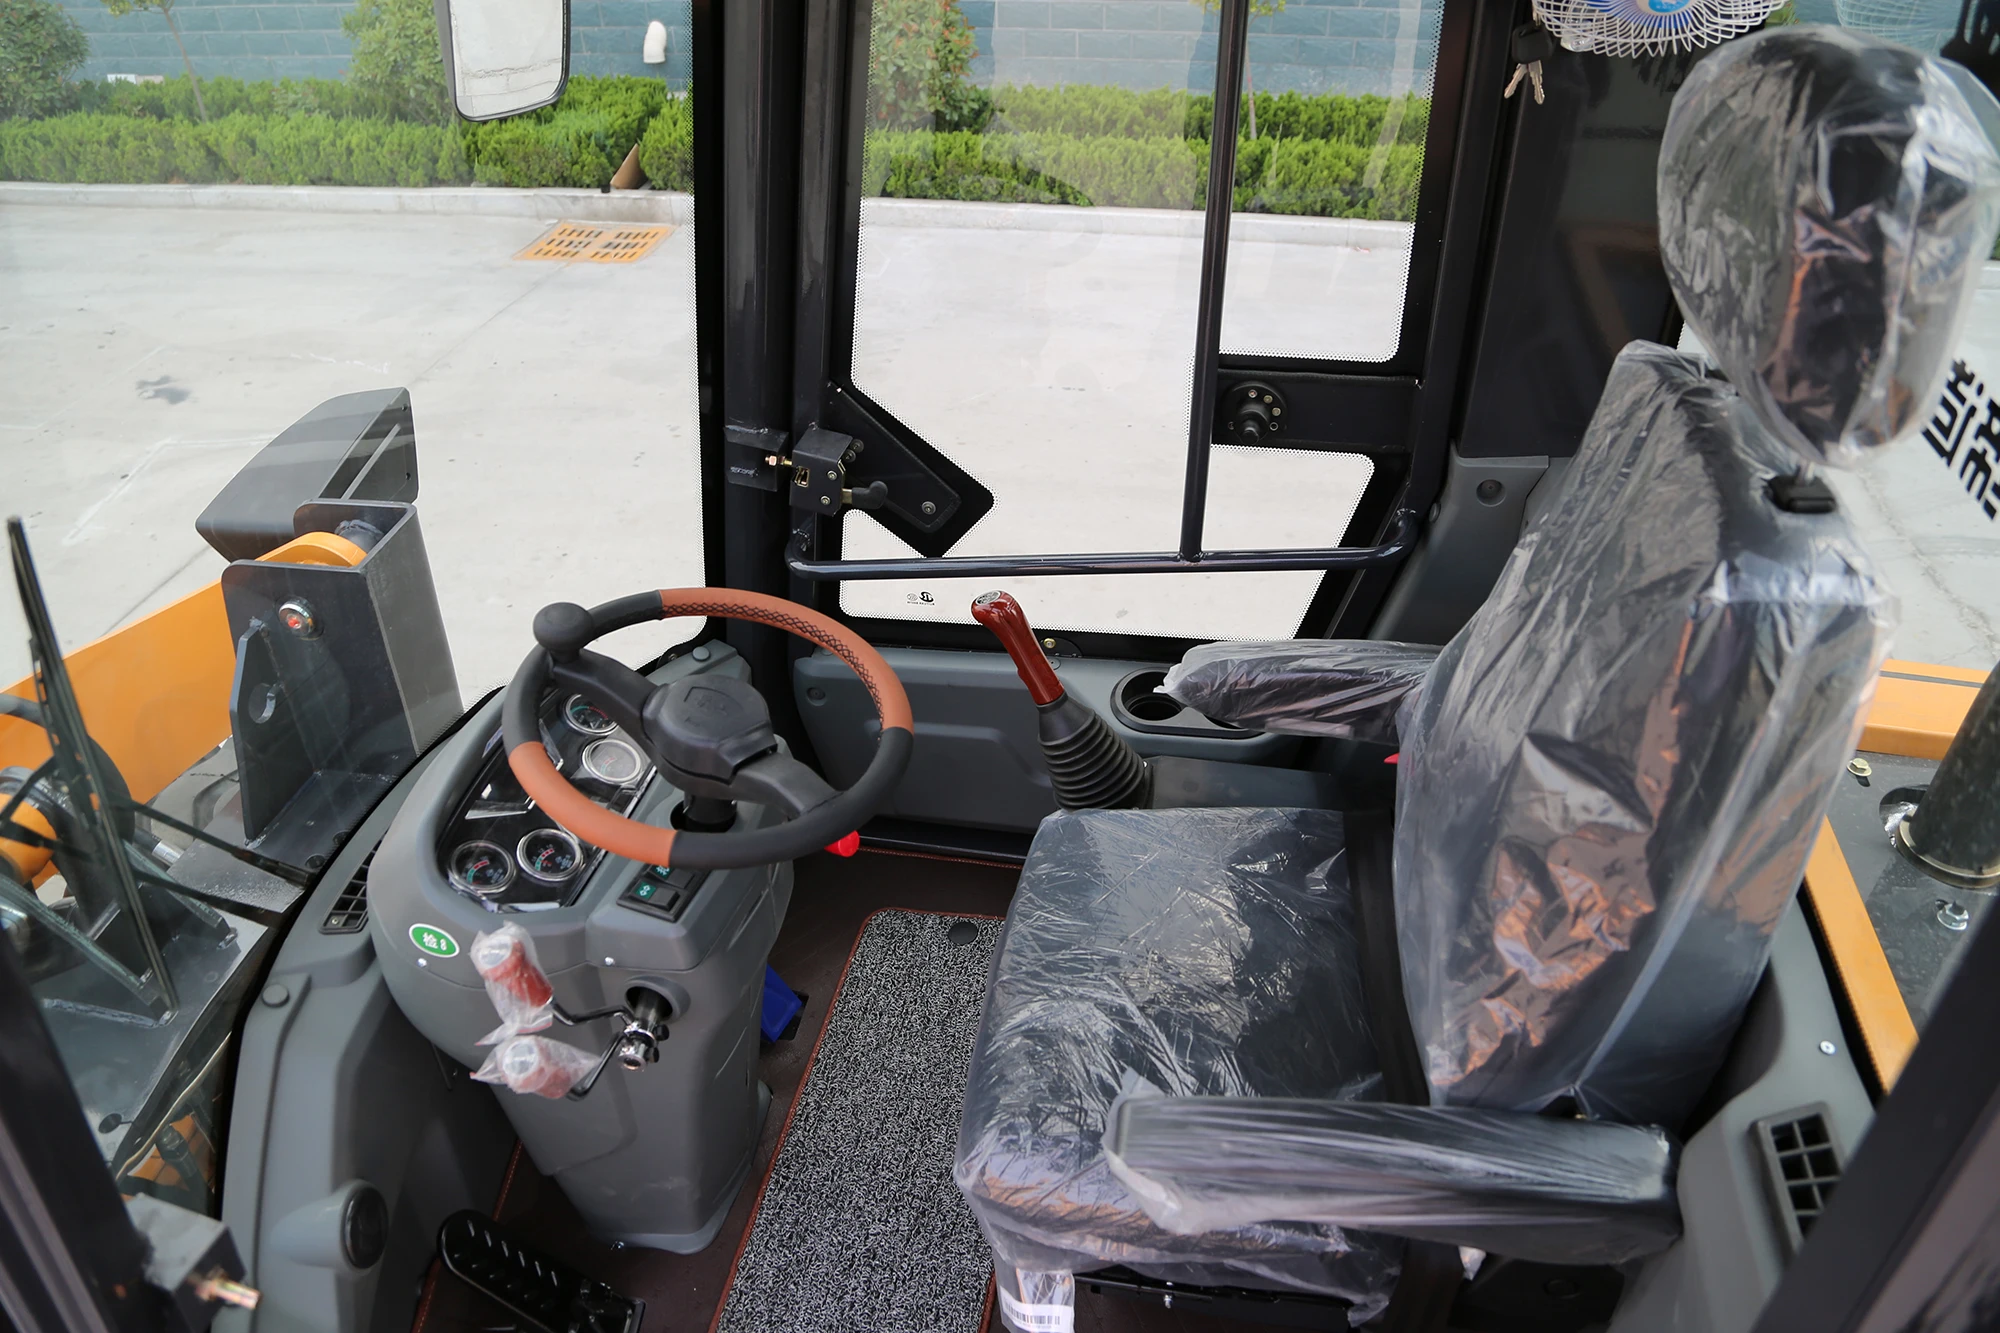 LuGong LG930 Ce Approved 1.8ton Mini Compact Wheel Loader for Weichai Engine